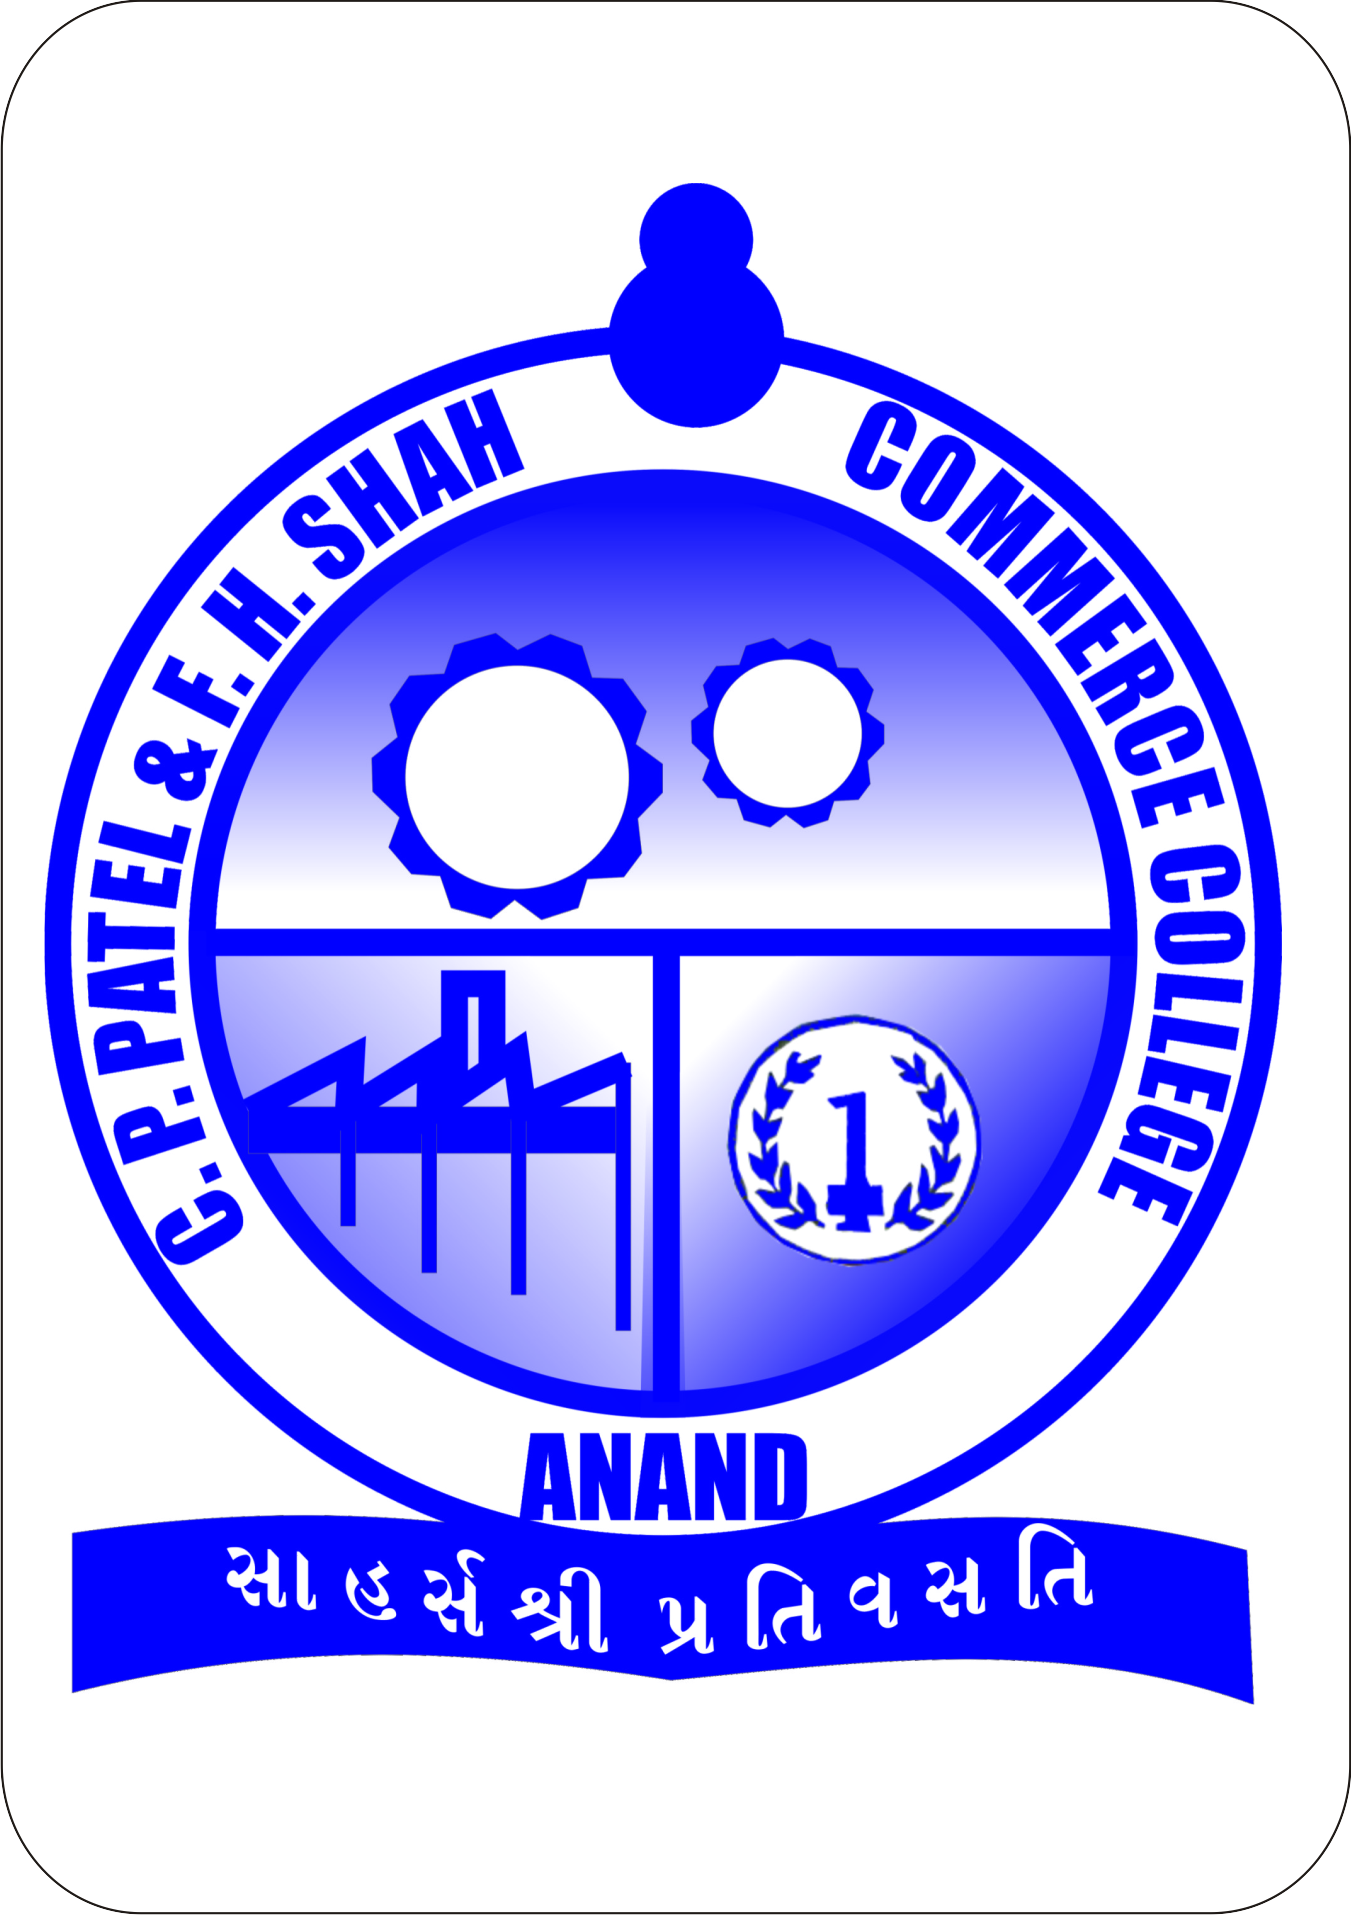 C P Patel and F H Shah Commerce College, Anand